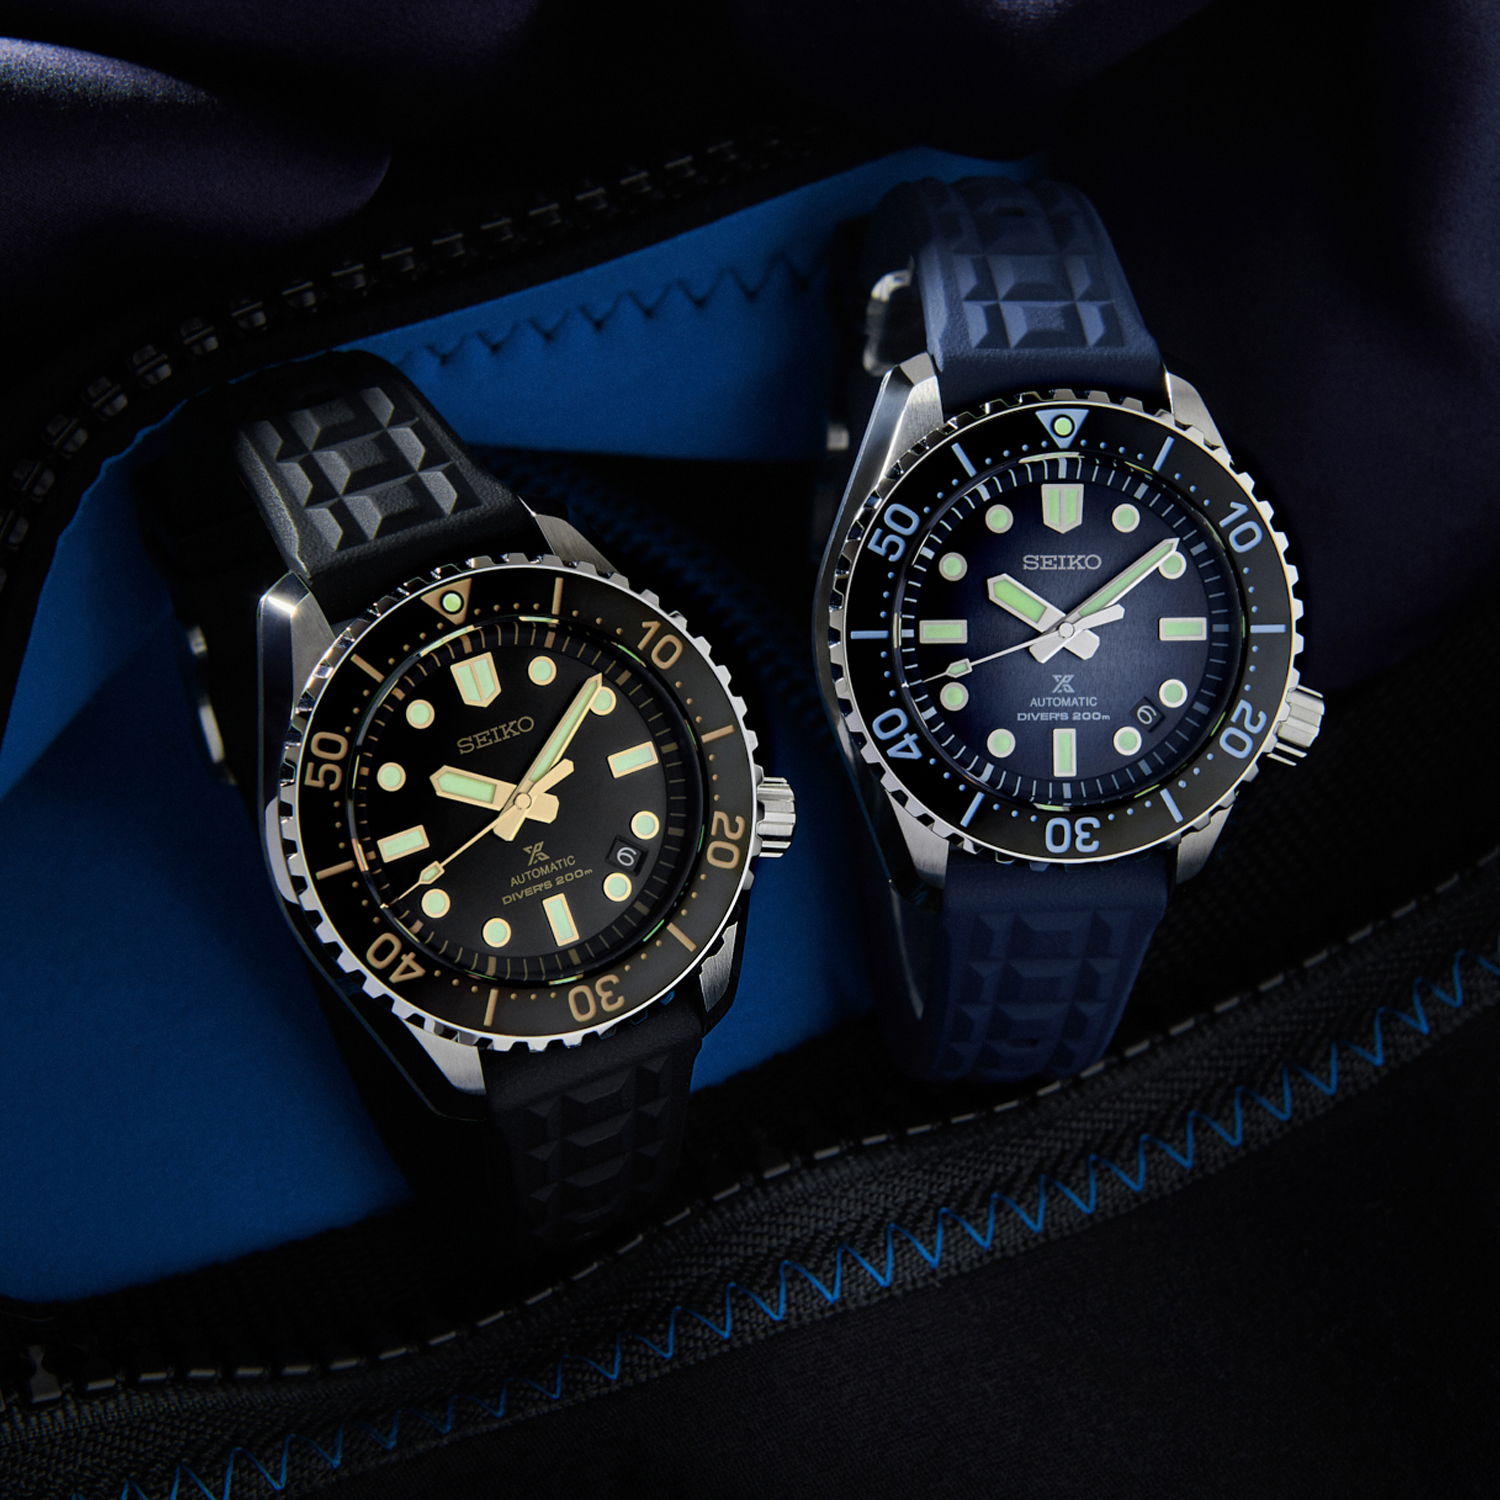 Brand New Seiko 'Antarctic Ice' Re-Issue Watch First Class Watches Blog |  